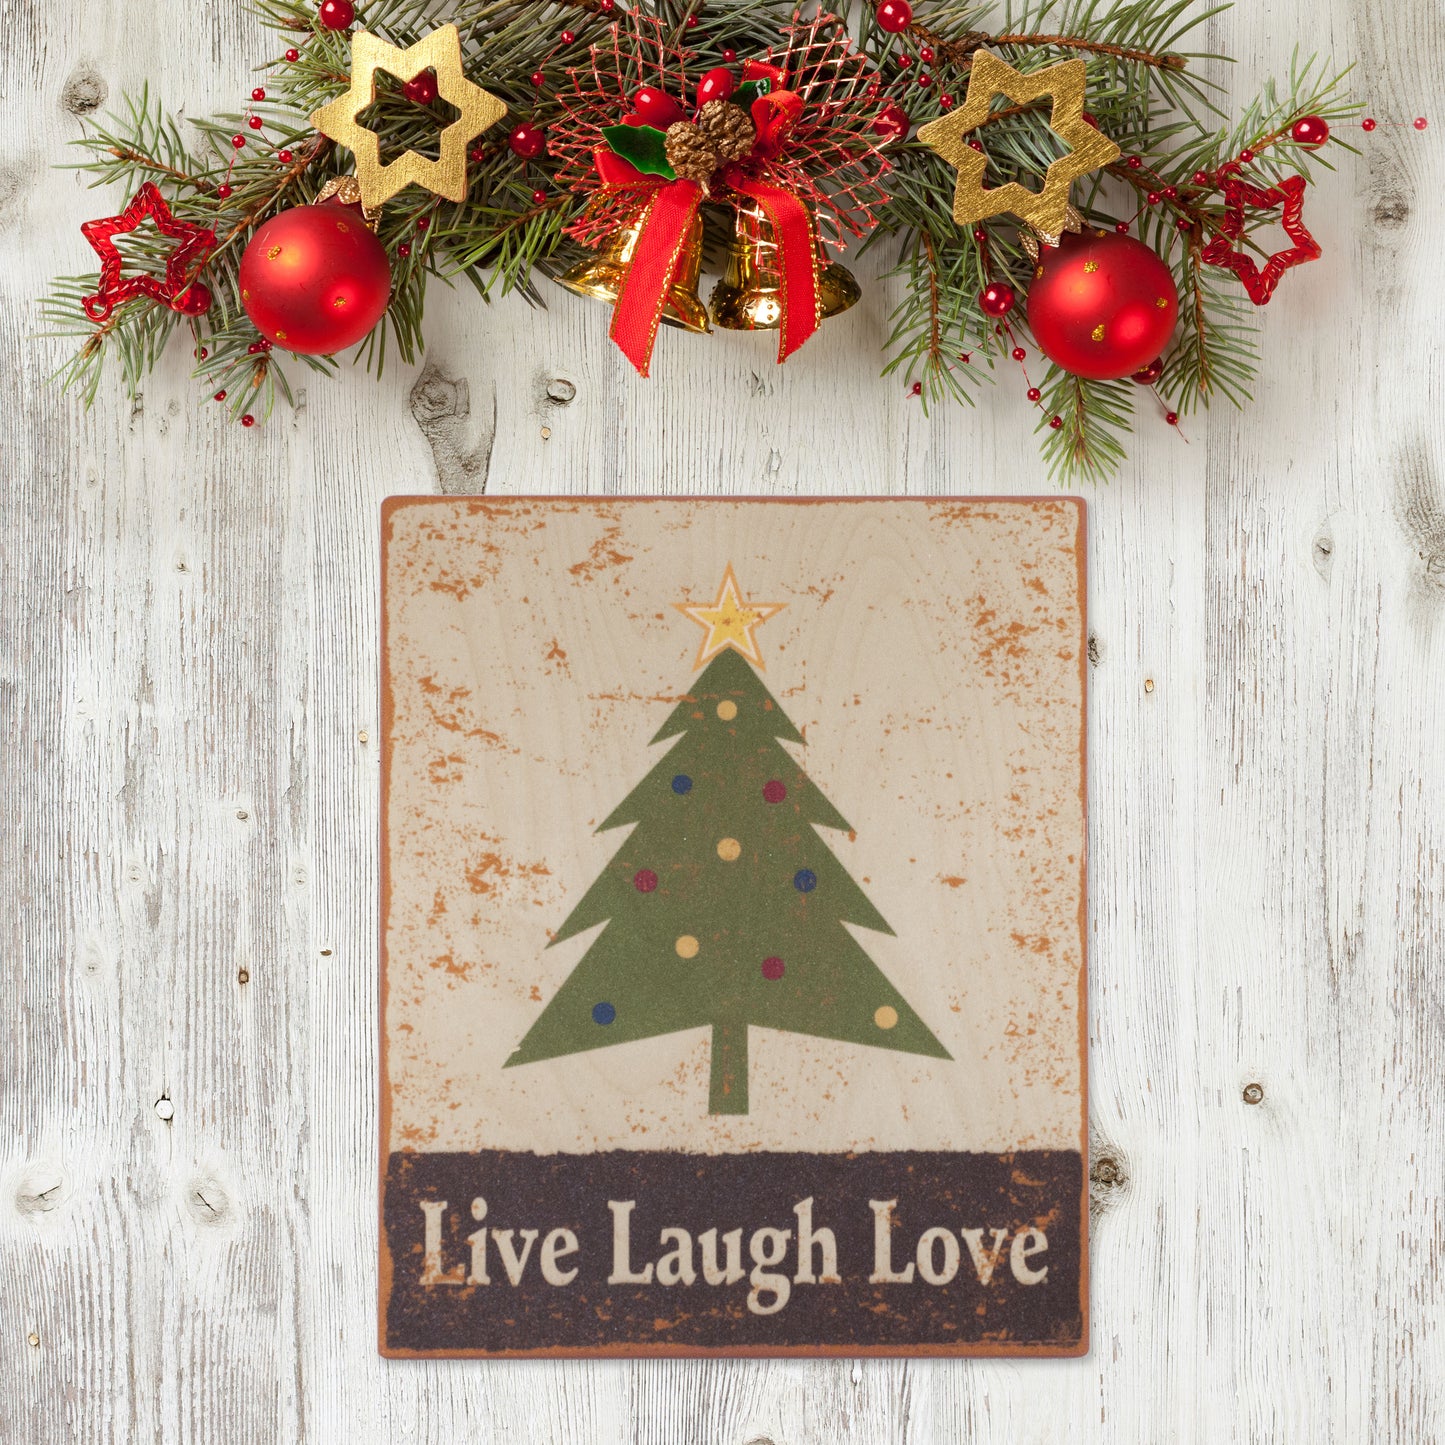 Star Topped Christmas Tree Wall Plaque Vintage Wood Sign Plaque by Live Laugh Love®